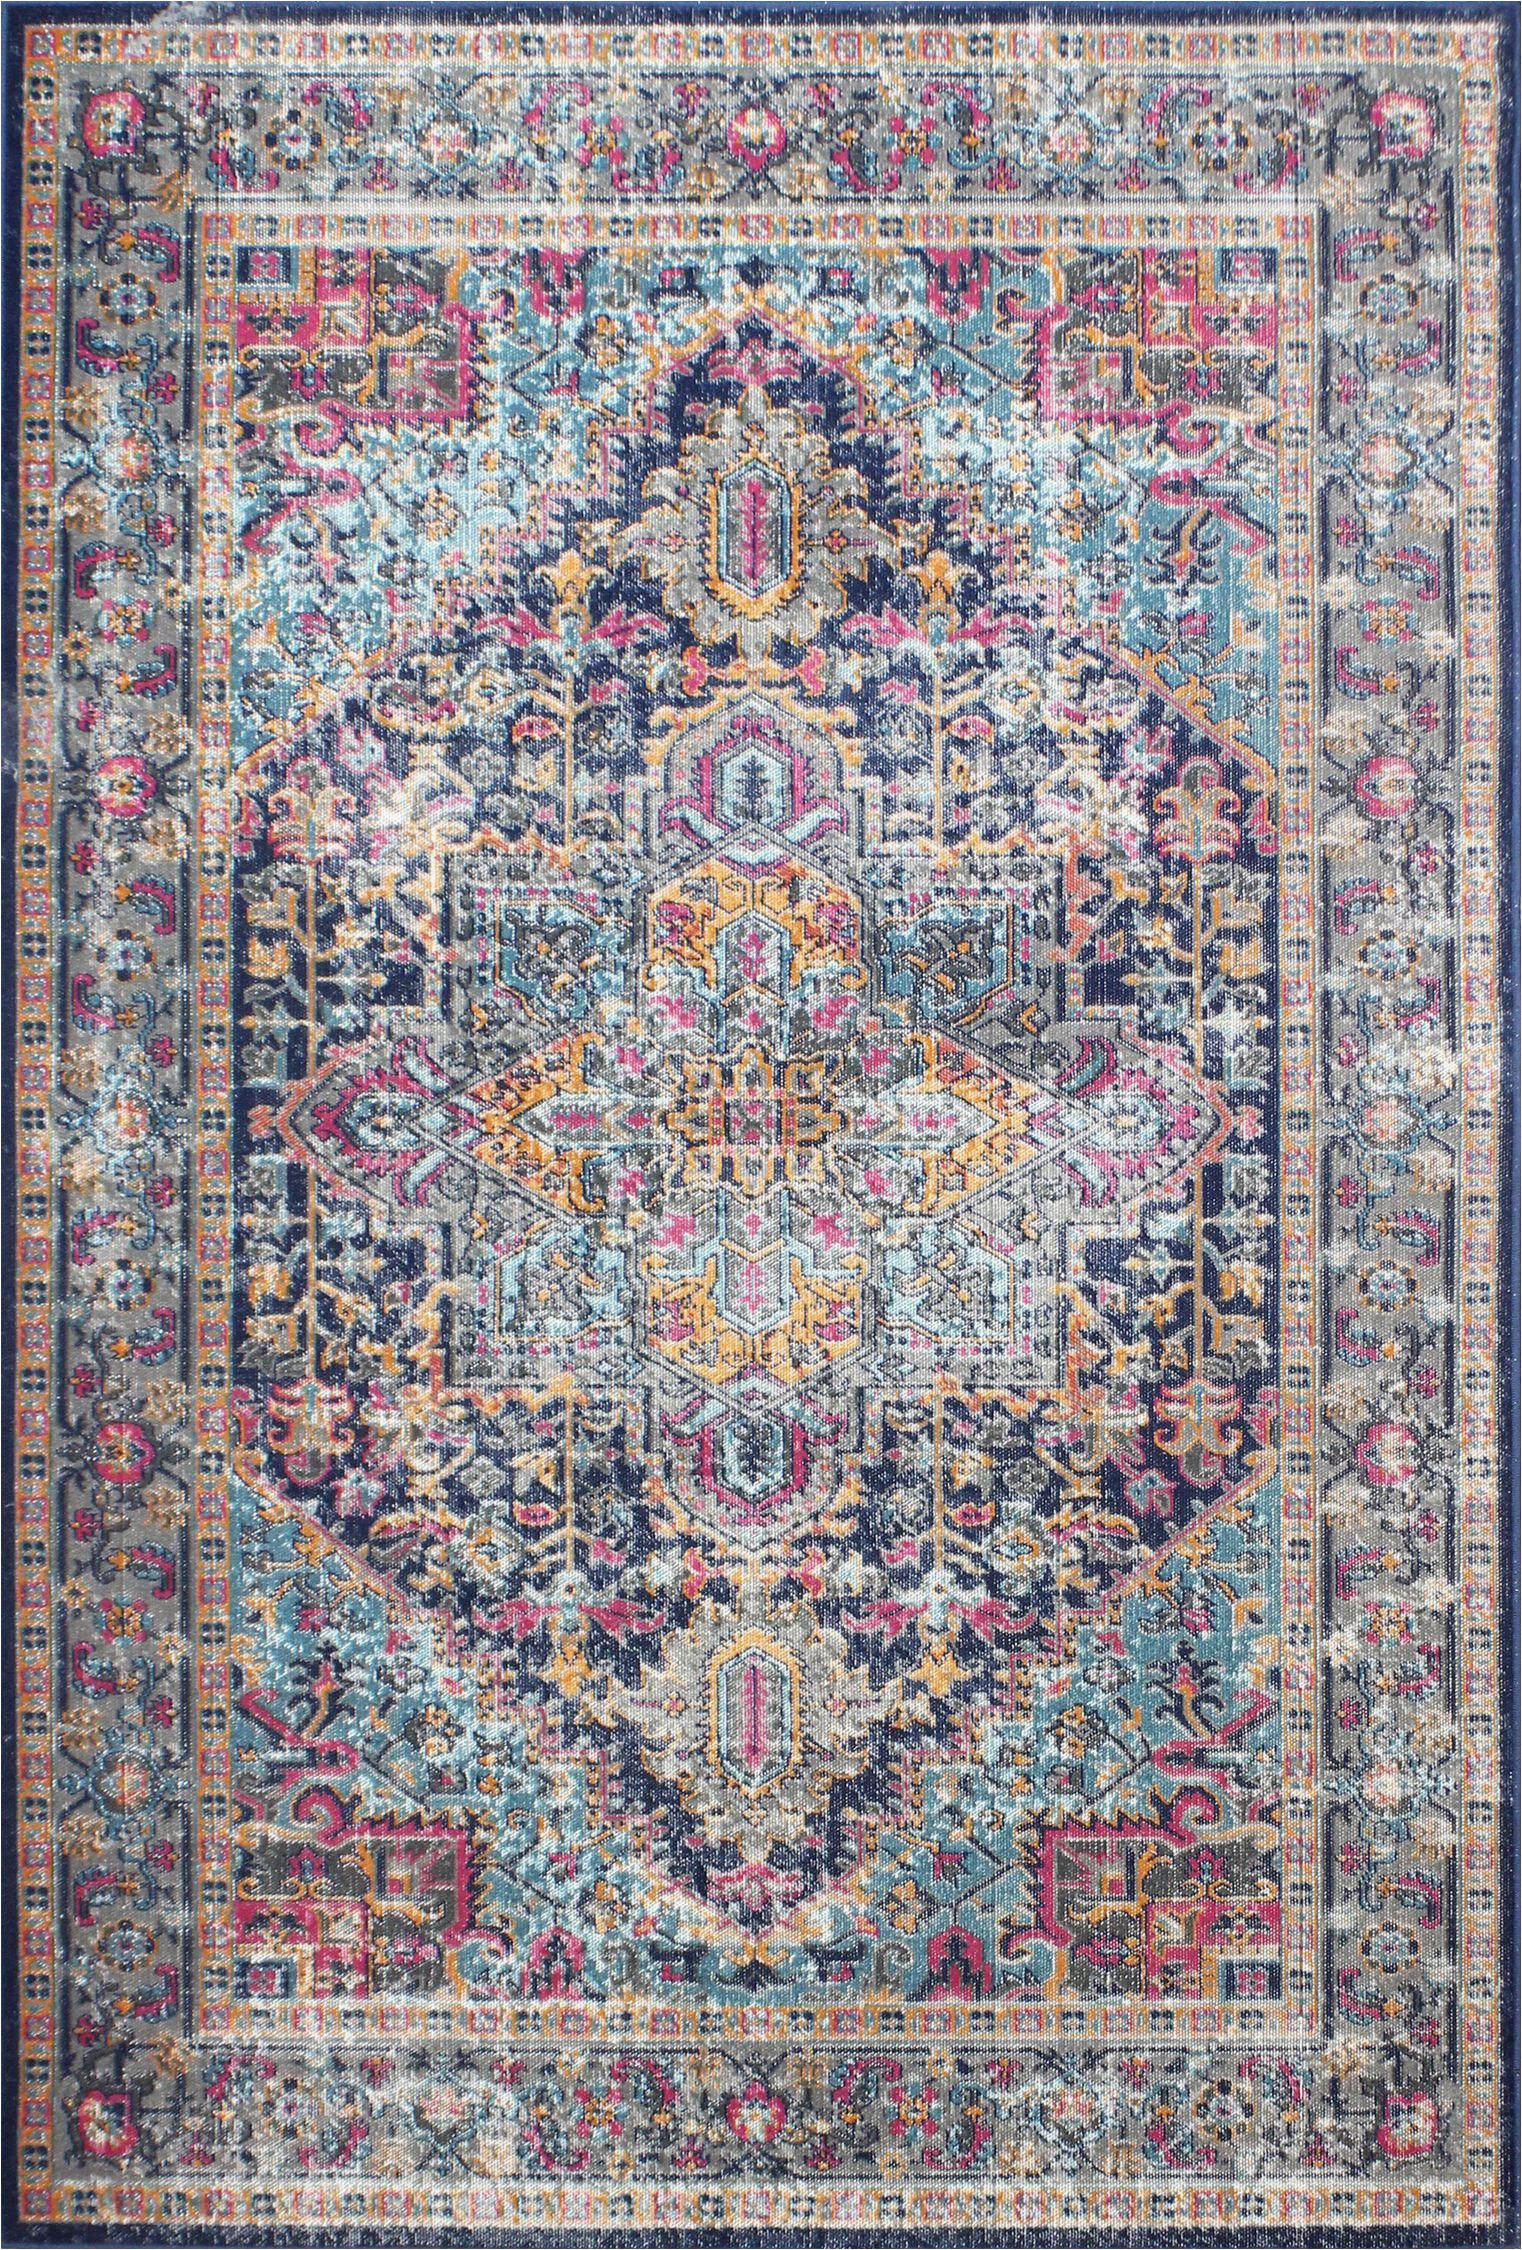 8 Ft Square area Rugs Blake Rug On Plushrugs Free Shipping On All orders